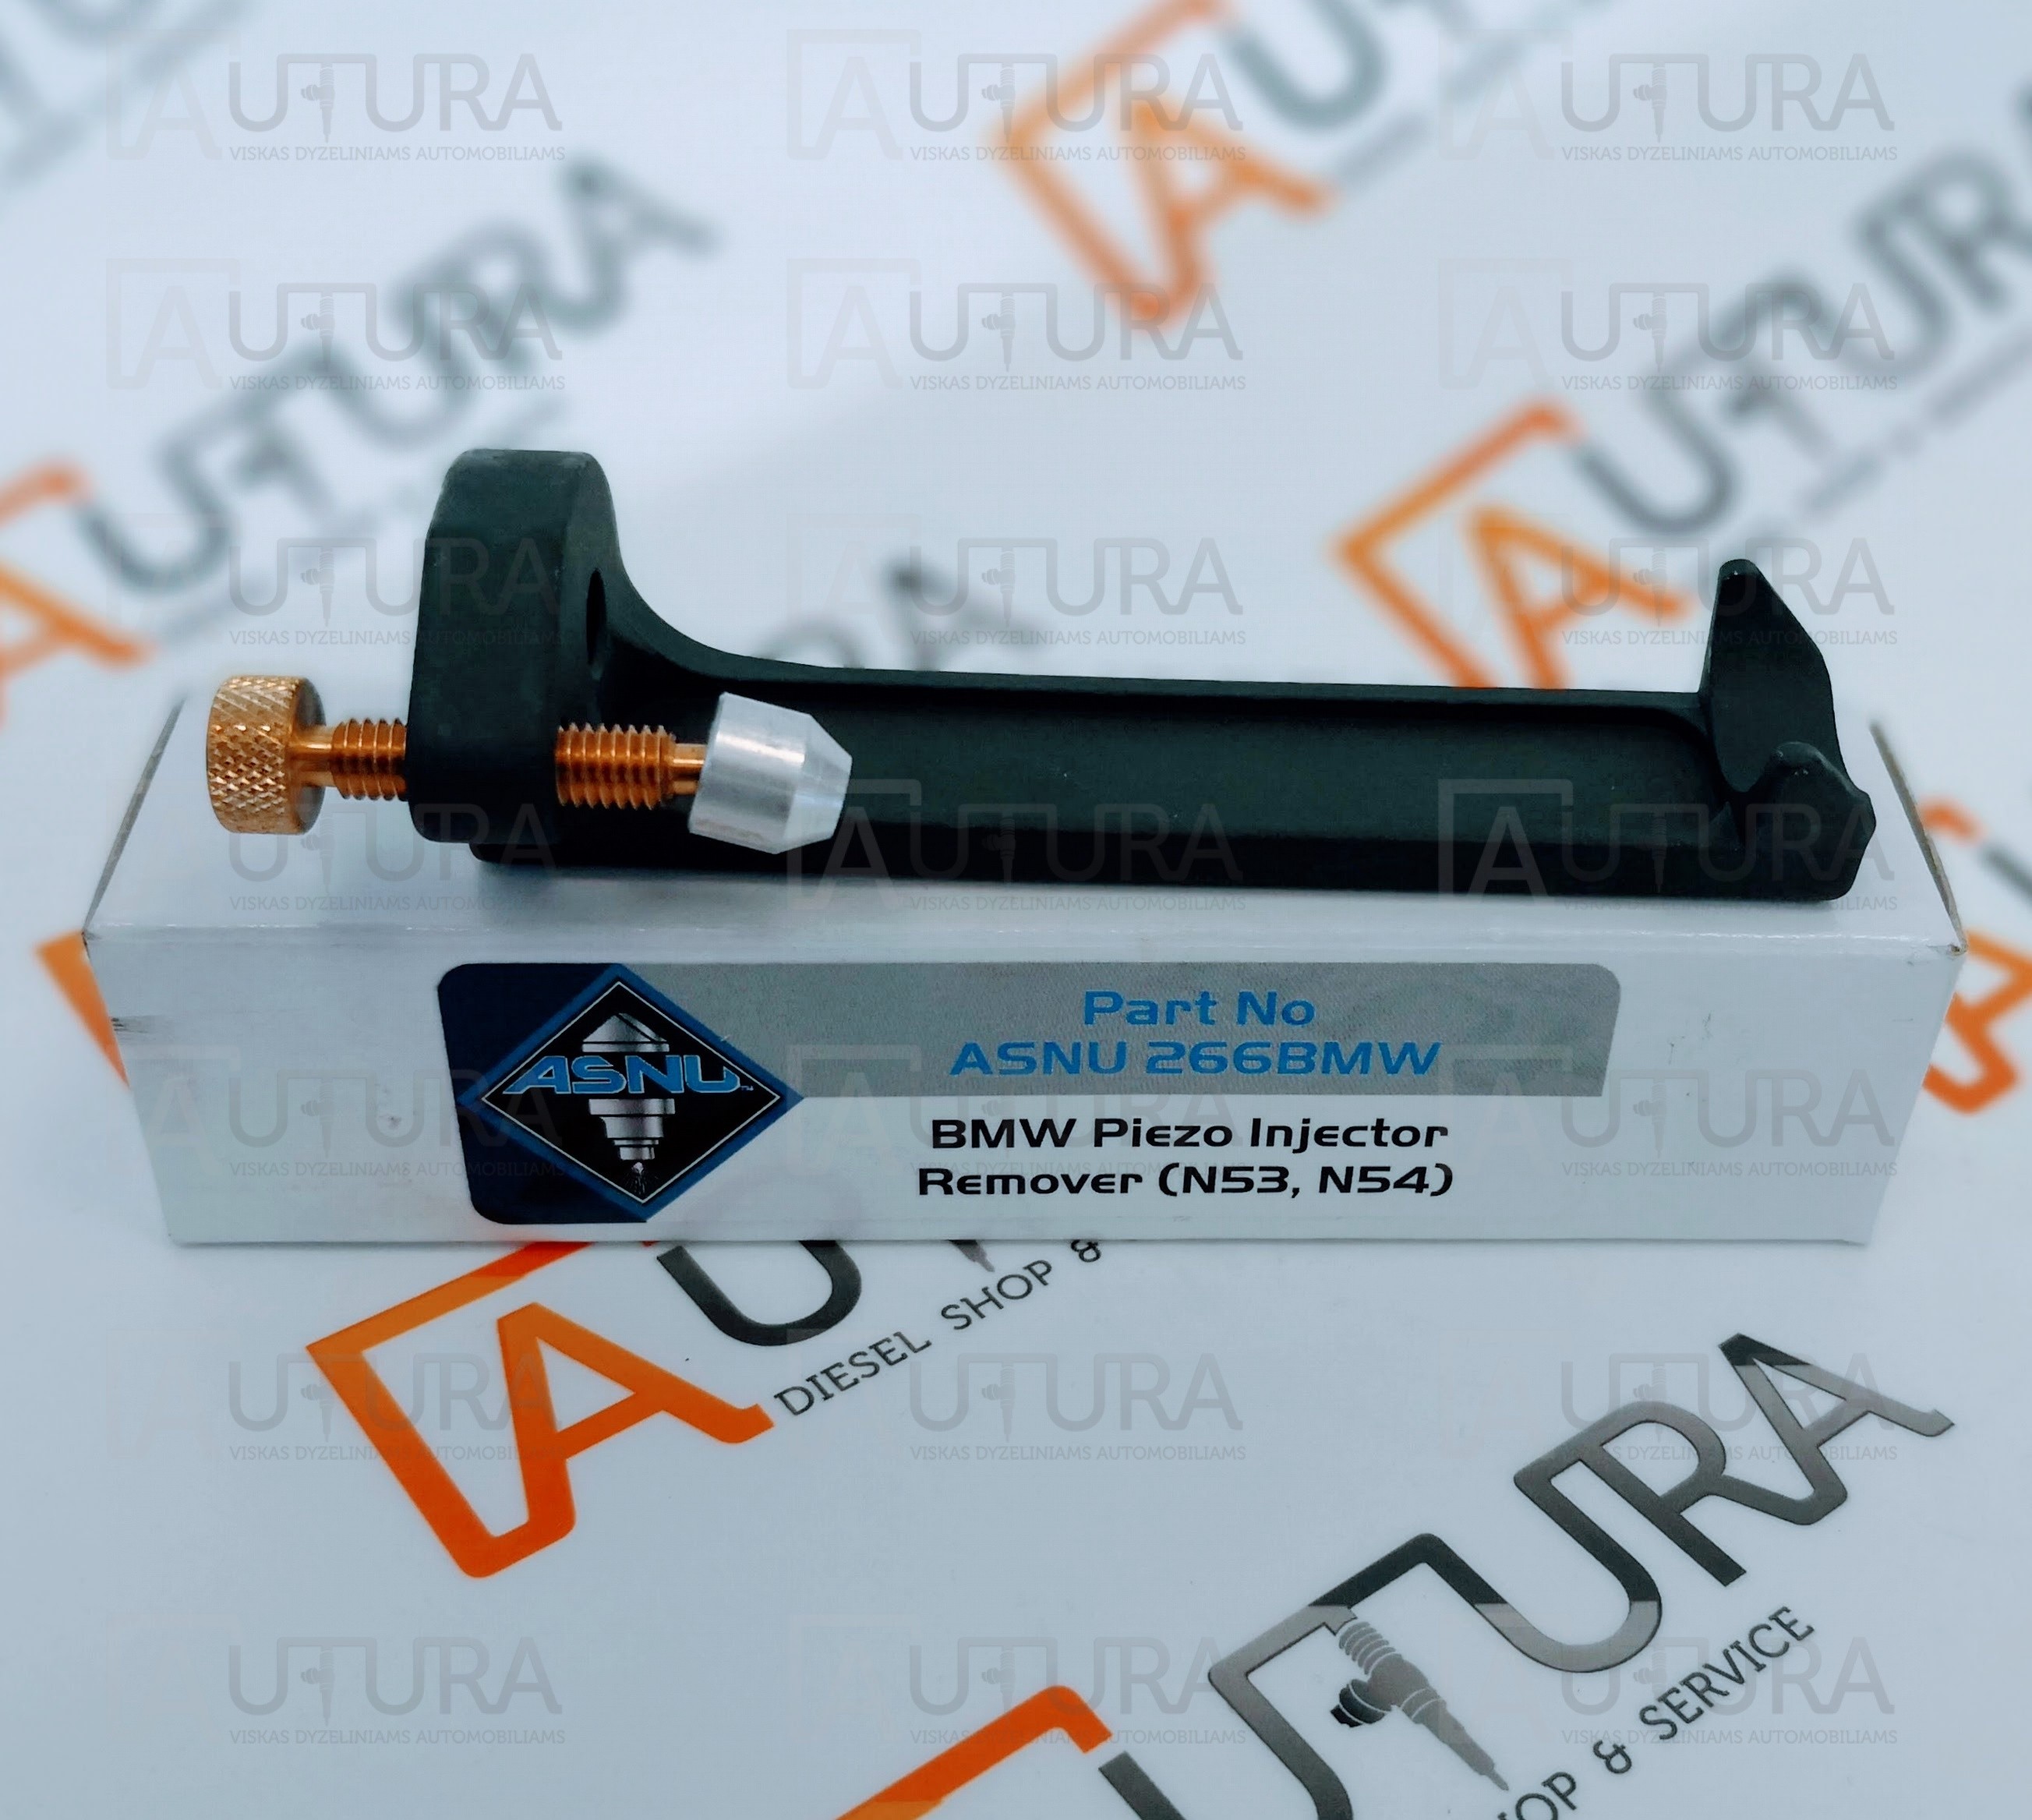 ADAPTOR FOR REMOVING BMW PIEZO INJECTORS - USE WITH 266EXT